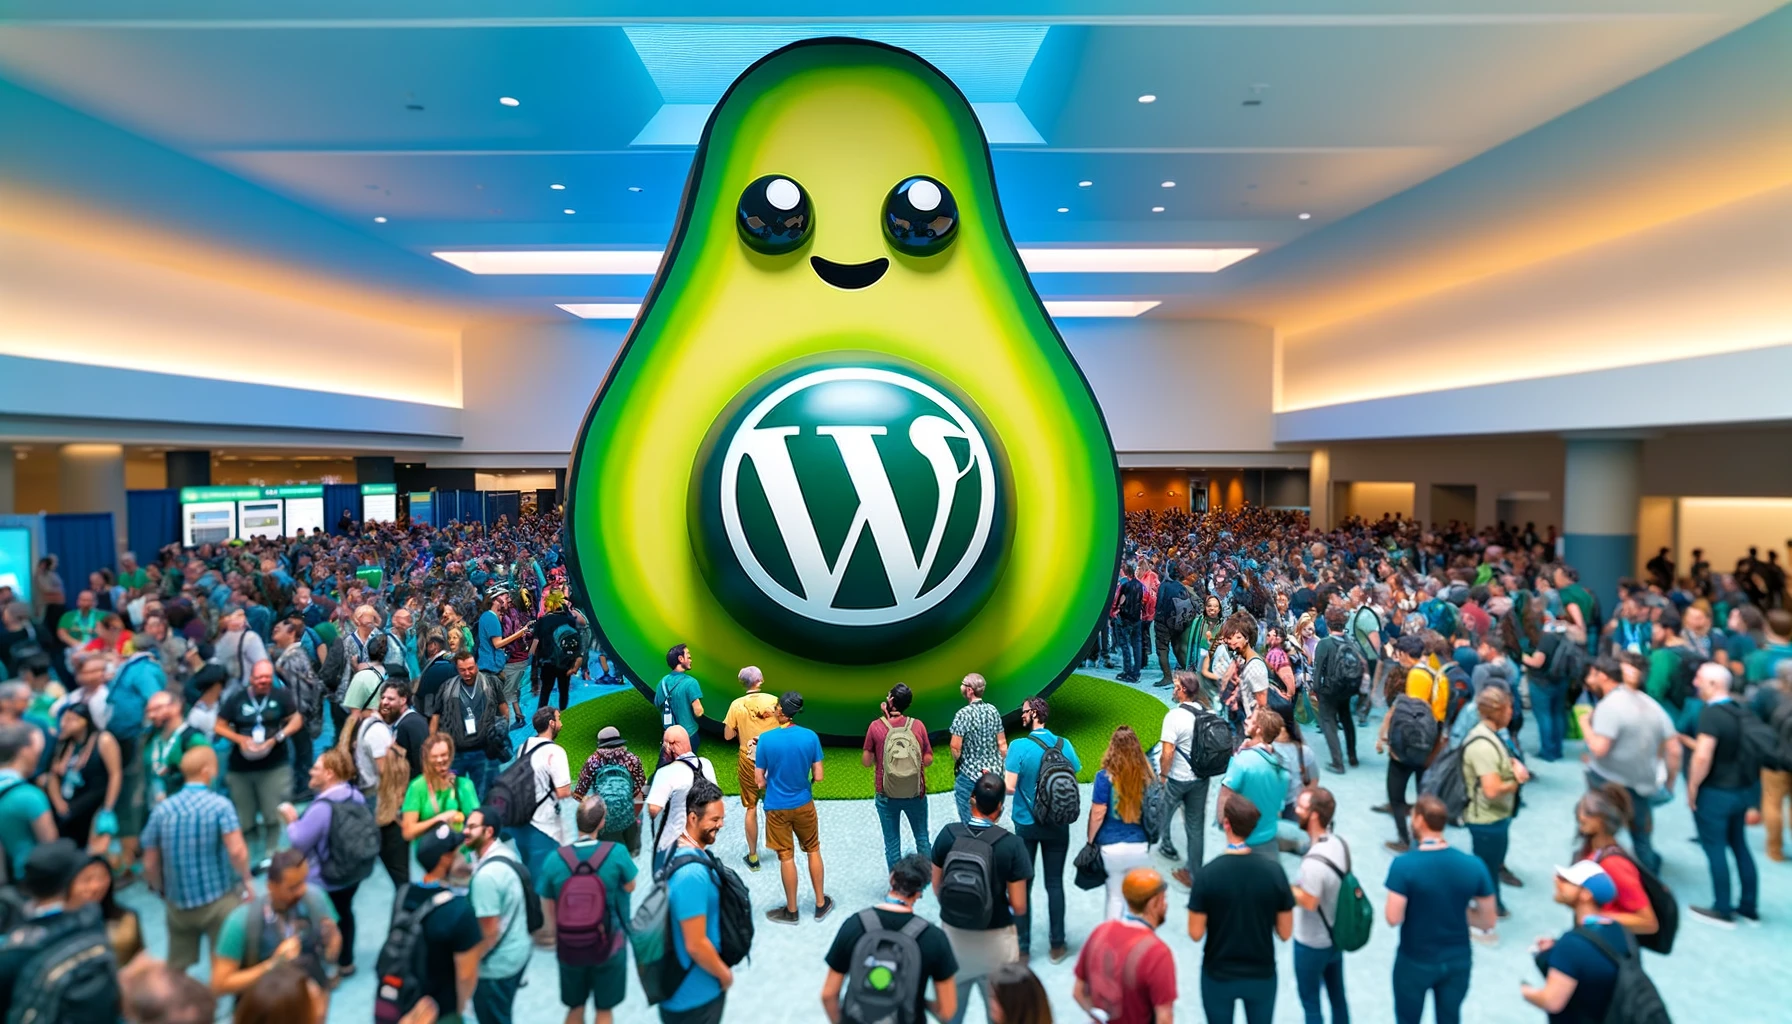 An imaginative depiction of a WordPress conference scene, with a giant avocado emoji at the center, its pit replaced by the WordPress logo. Around it, a diverse group of people representing various ethnicities, genders, ages, and abilities are engaged in conversations, emphasizing inclusivity and accessibility within the community.